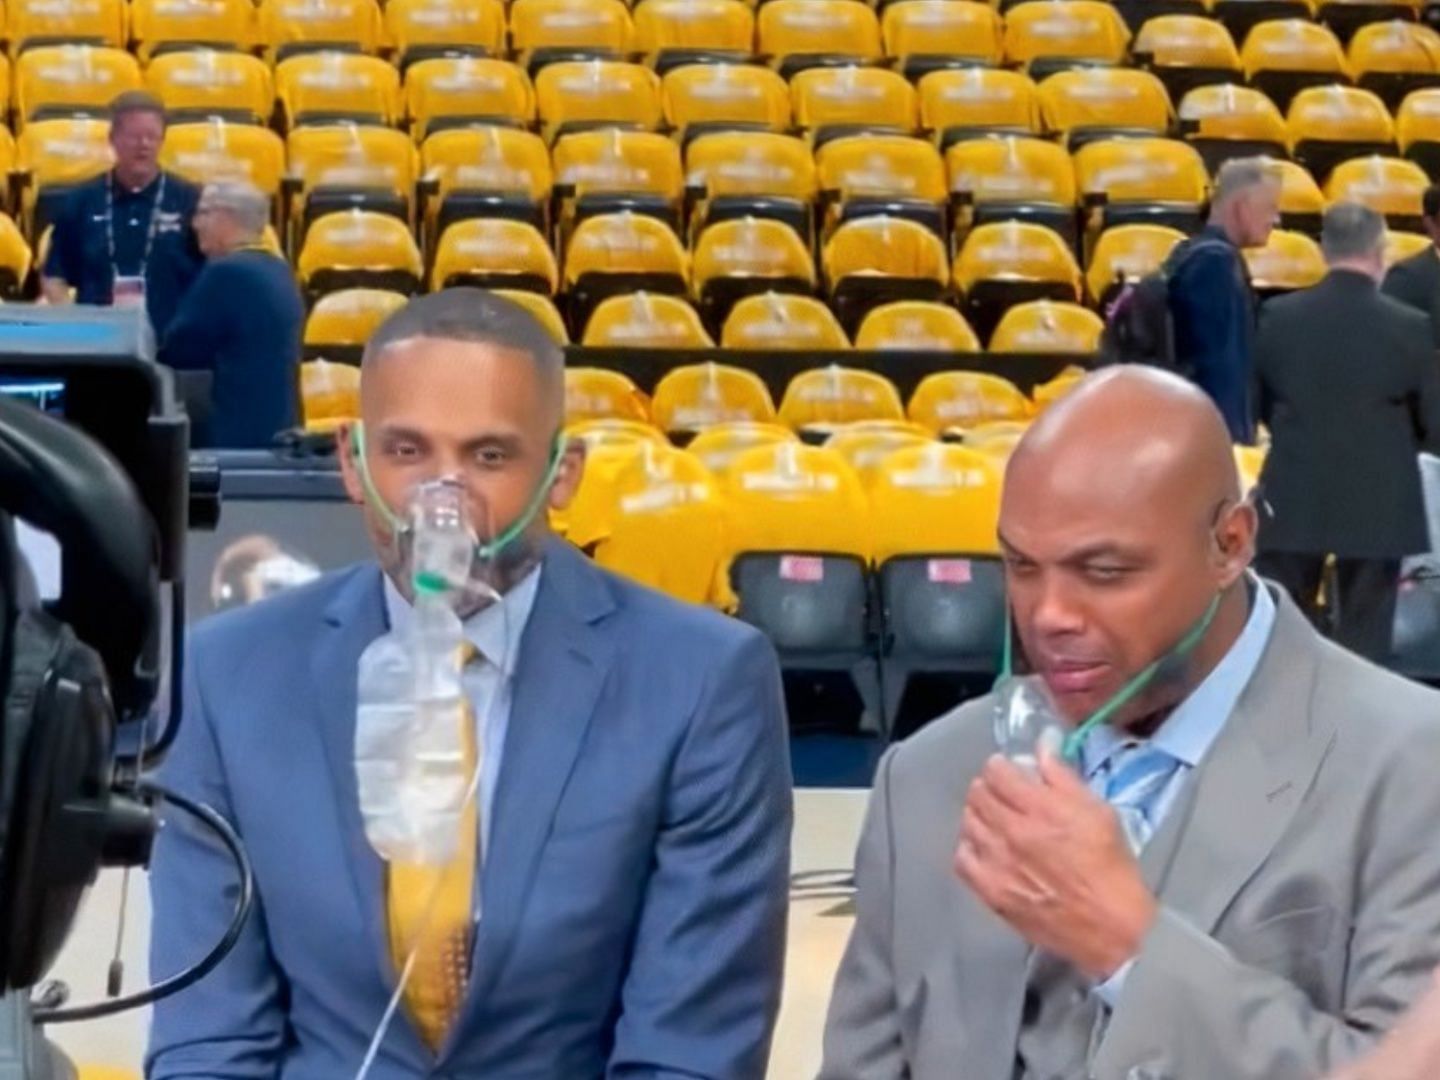 Grant Hill and Charles Barkley needed oxygen ahead of Game 1 of the NBA Finals. (Photo: Sportskeeda Basketball/Twitter)